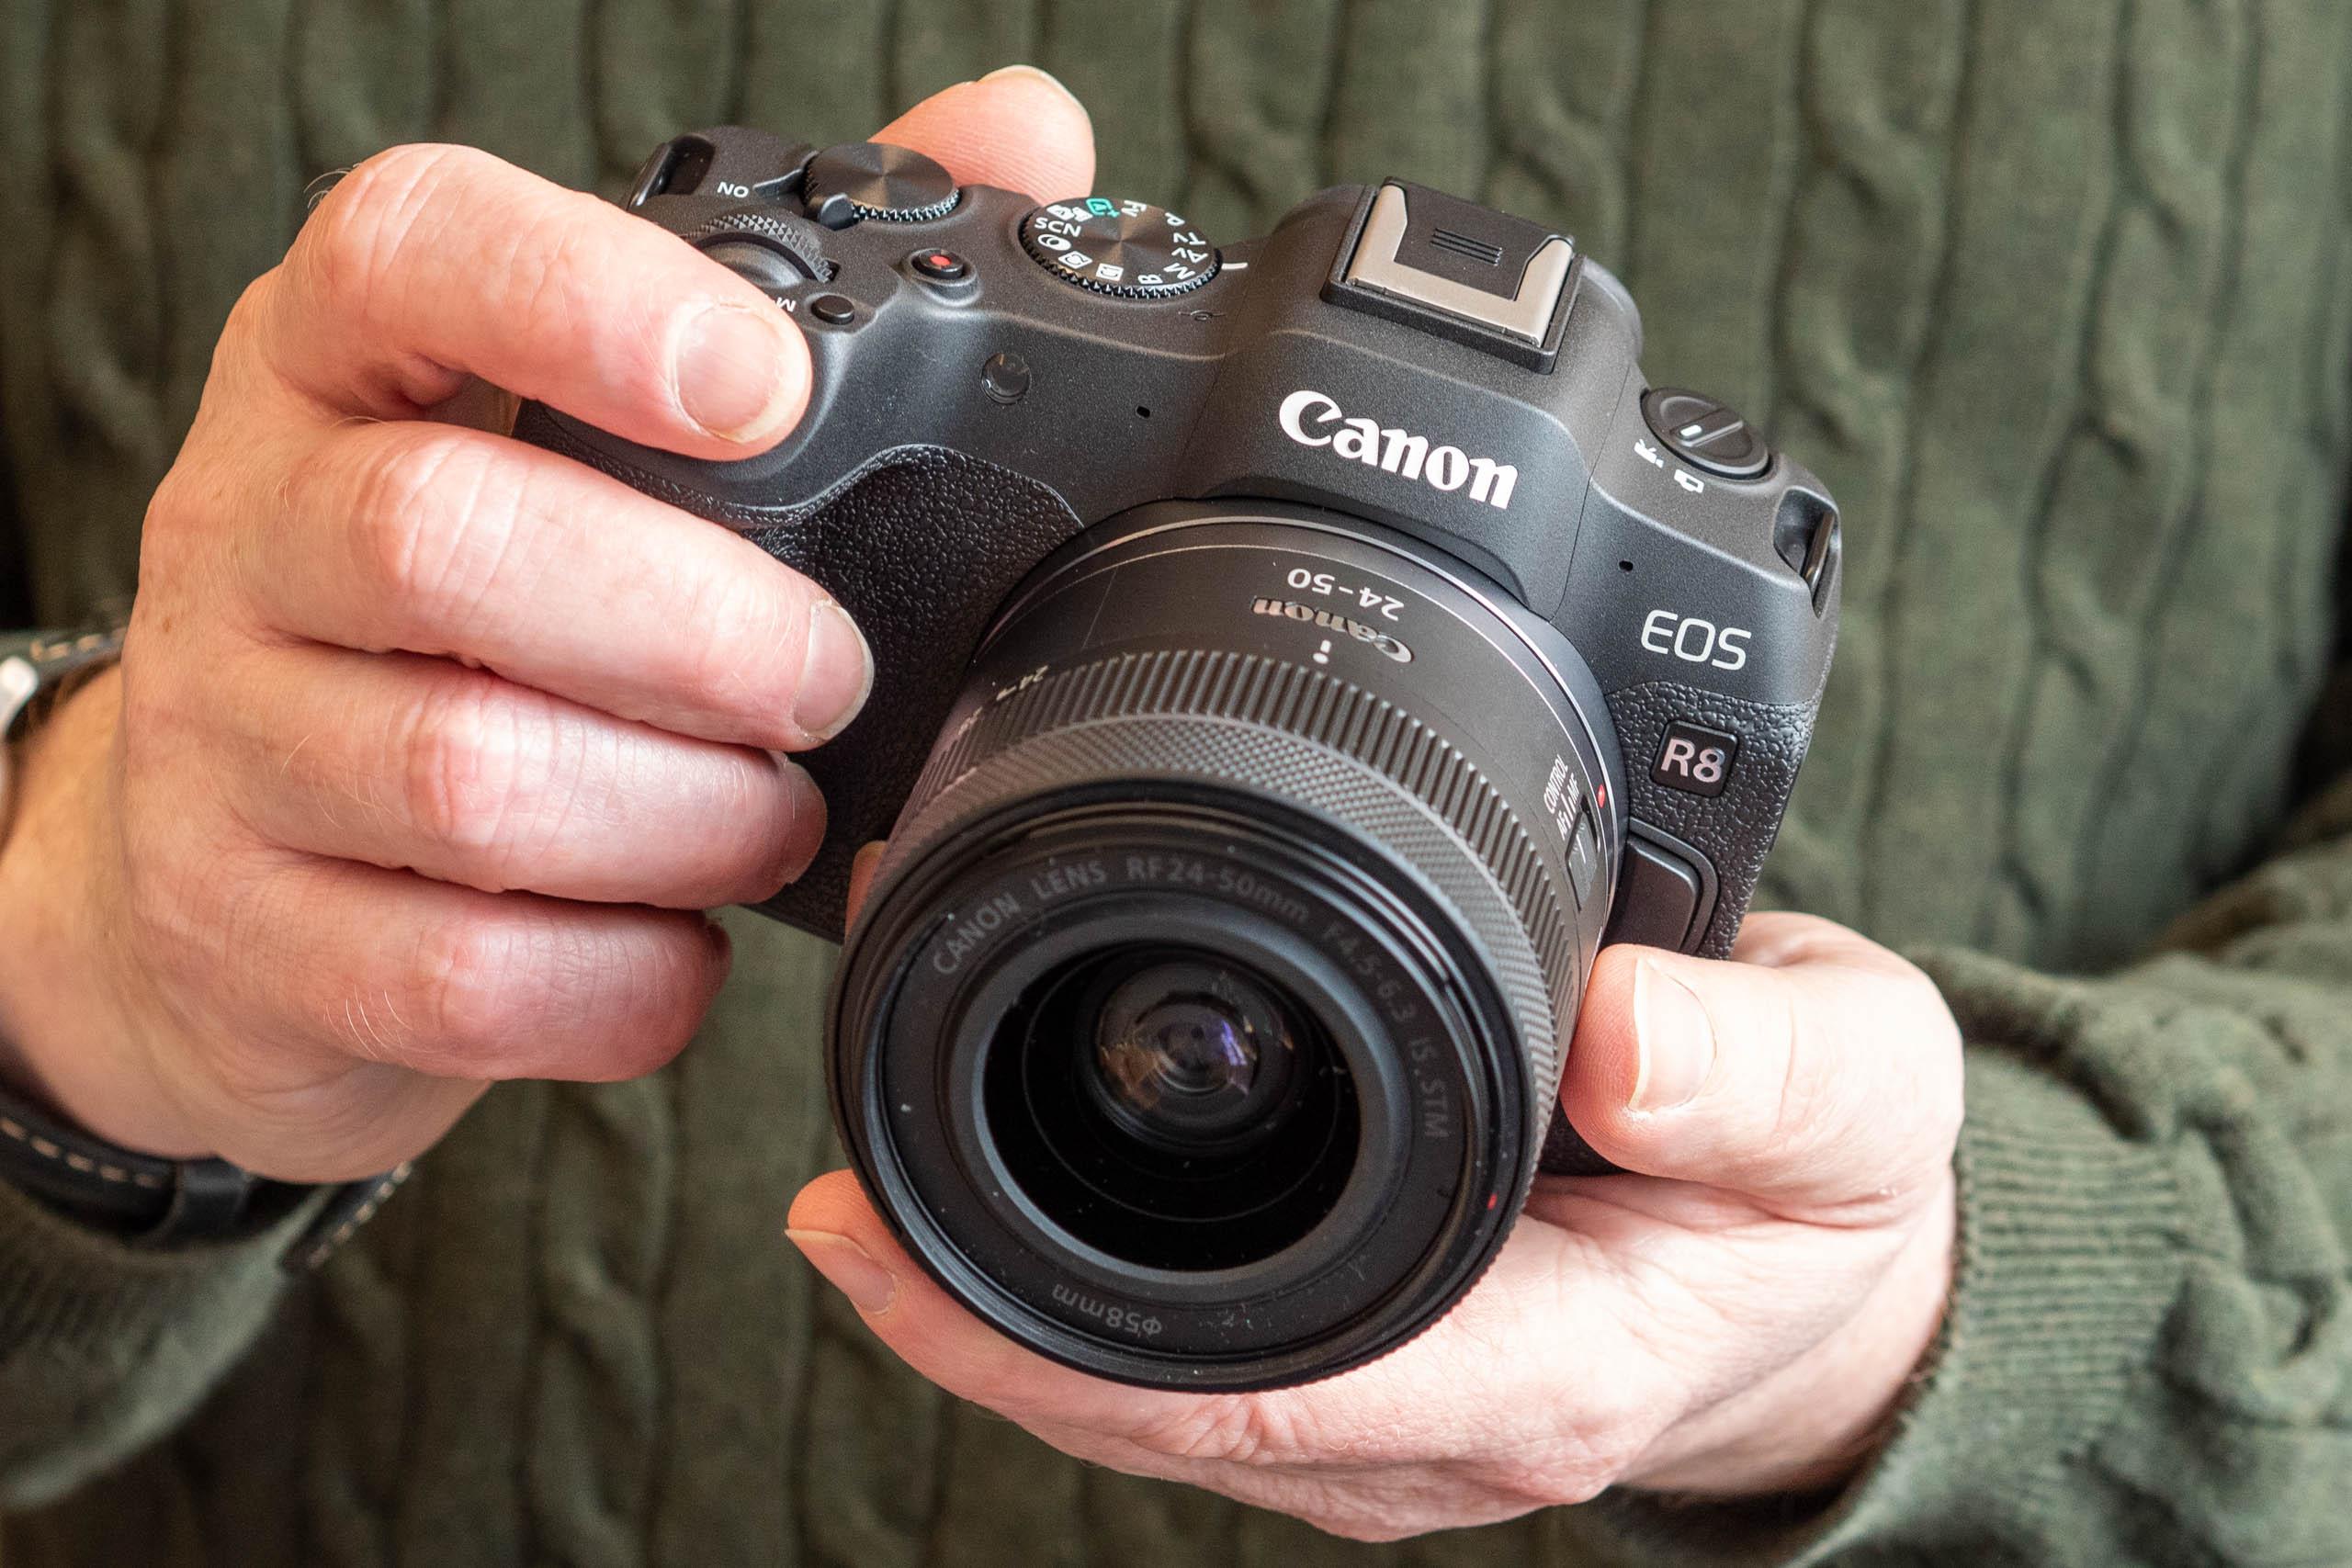 Canon EOS R8 Review: Budget Full Frame Power With Compromises